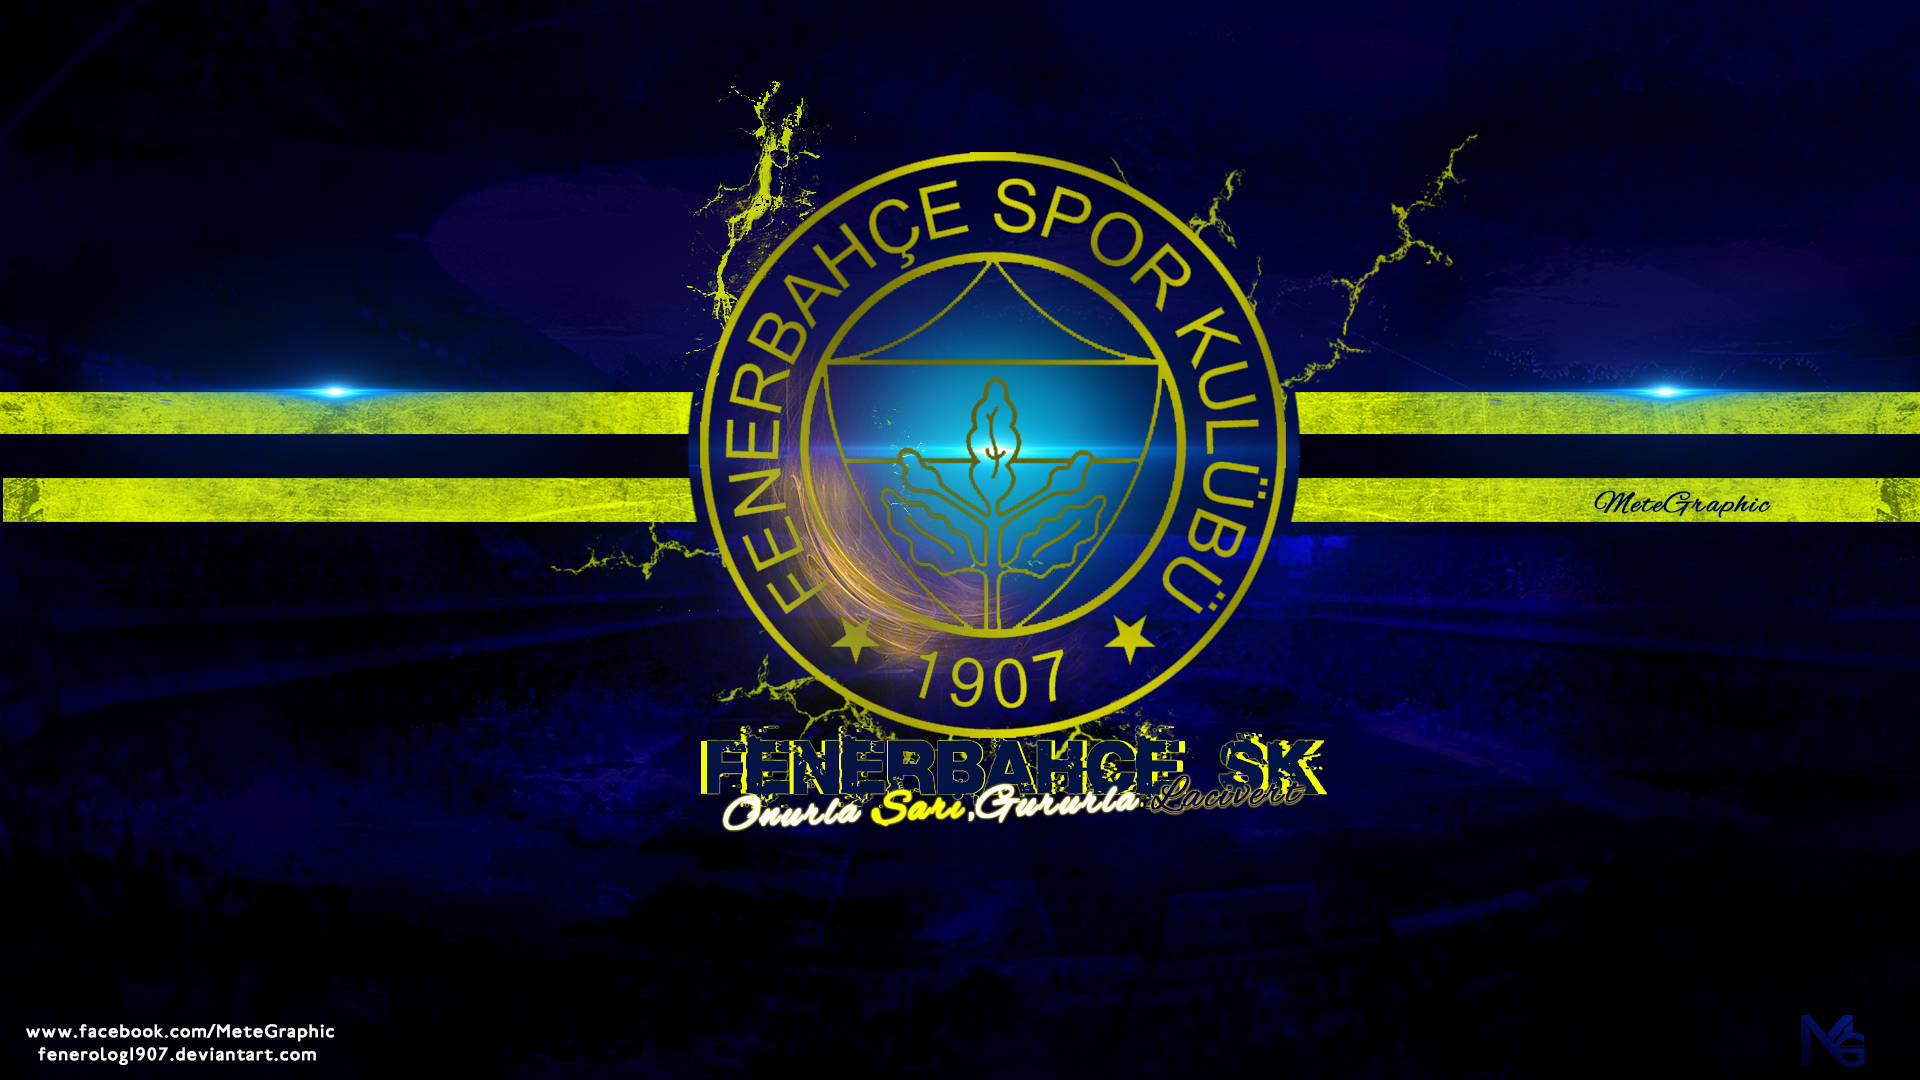 Electric Fenerbahce